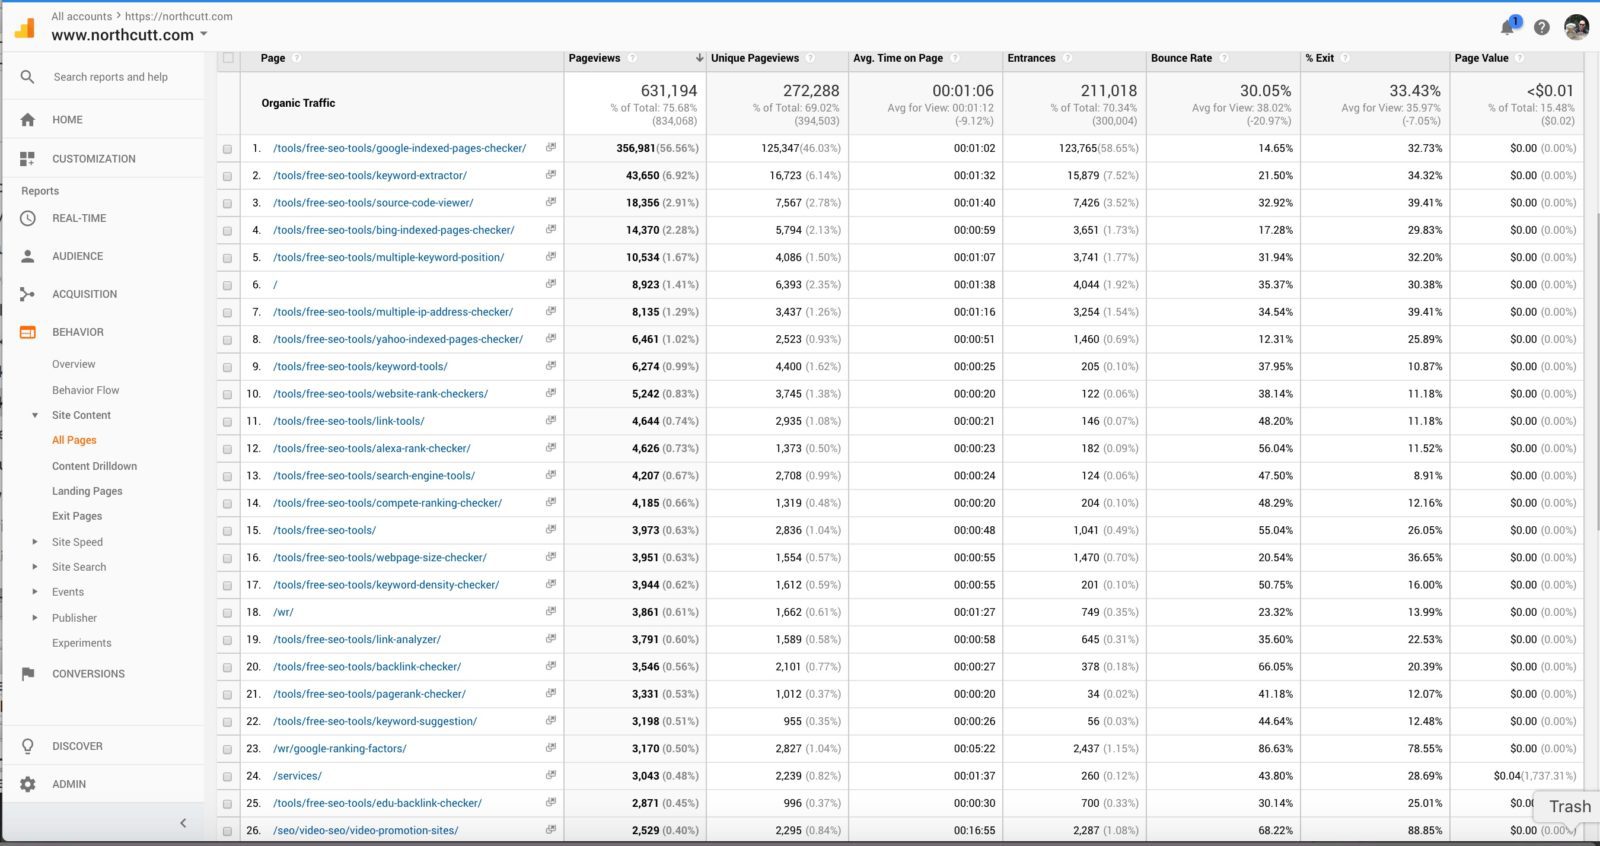 Screenshot of a google analytics dashboard showing web page traffic metrics such as pageviews, unique pageviews, average time on page, entrances, bounce rate, % exit, and page value.